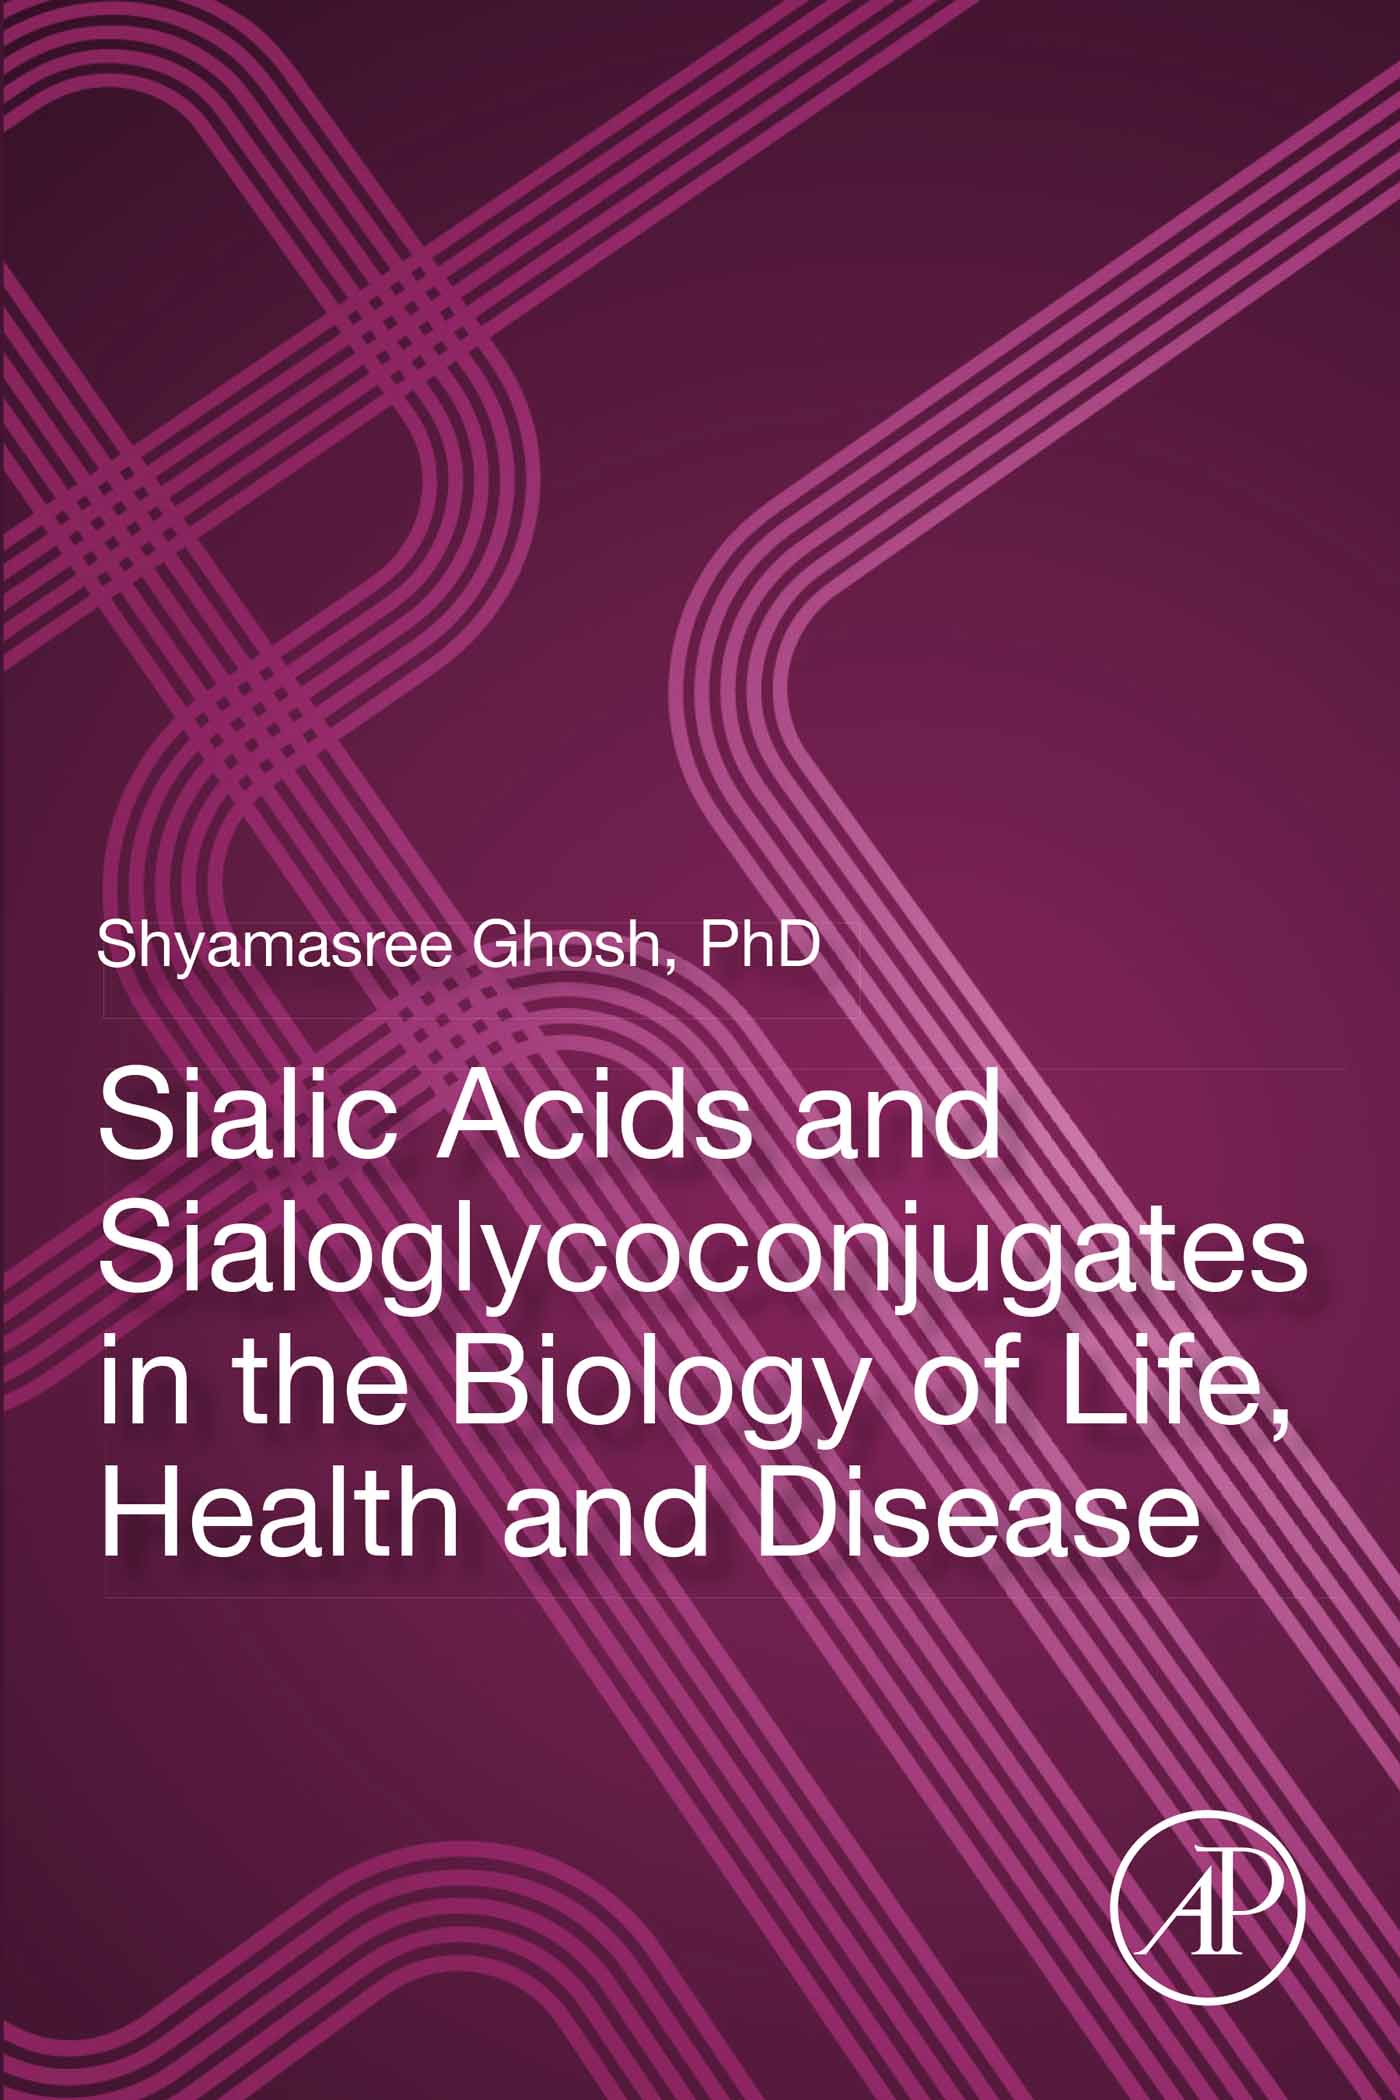 Sialic Acids and Sialoglycoconjugates in the Biology of Life, Health and Disease – eBook PDF